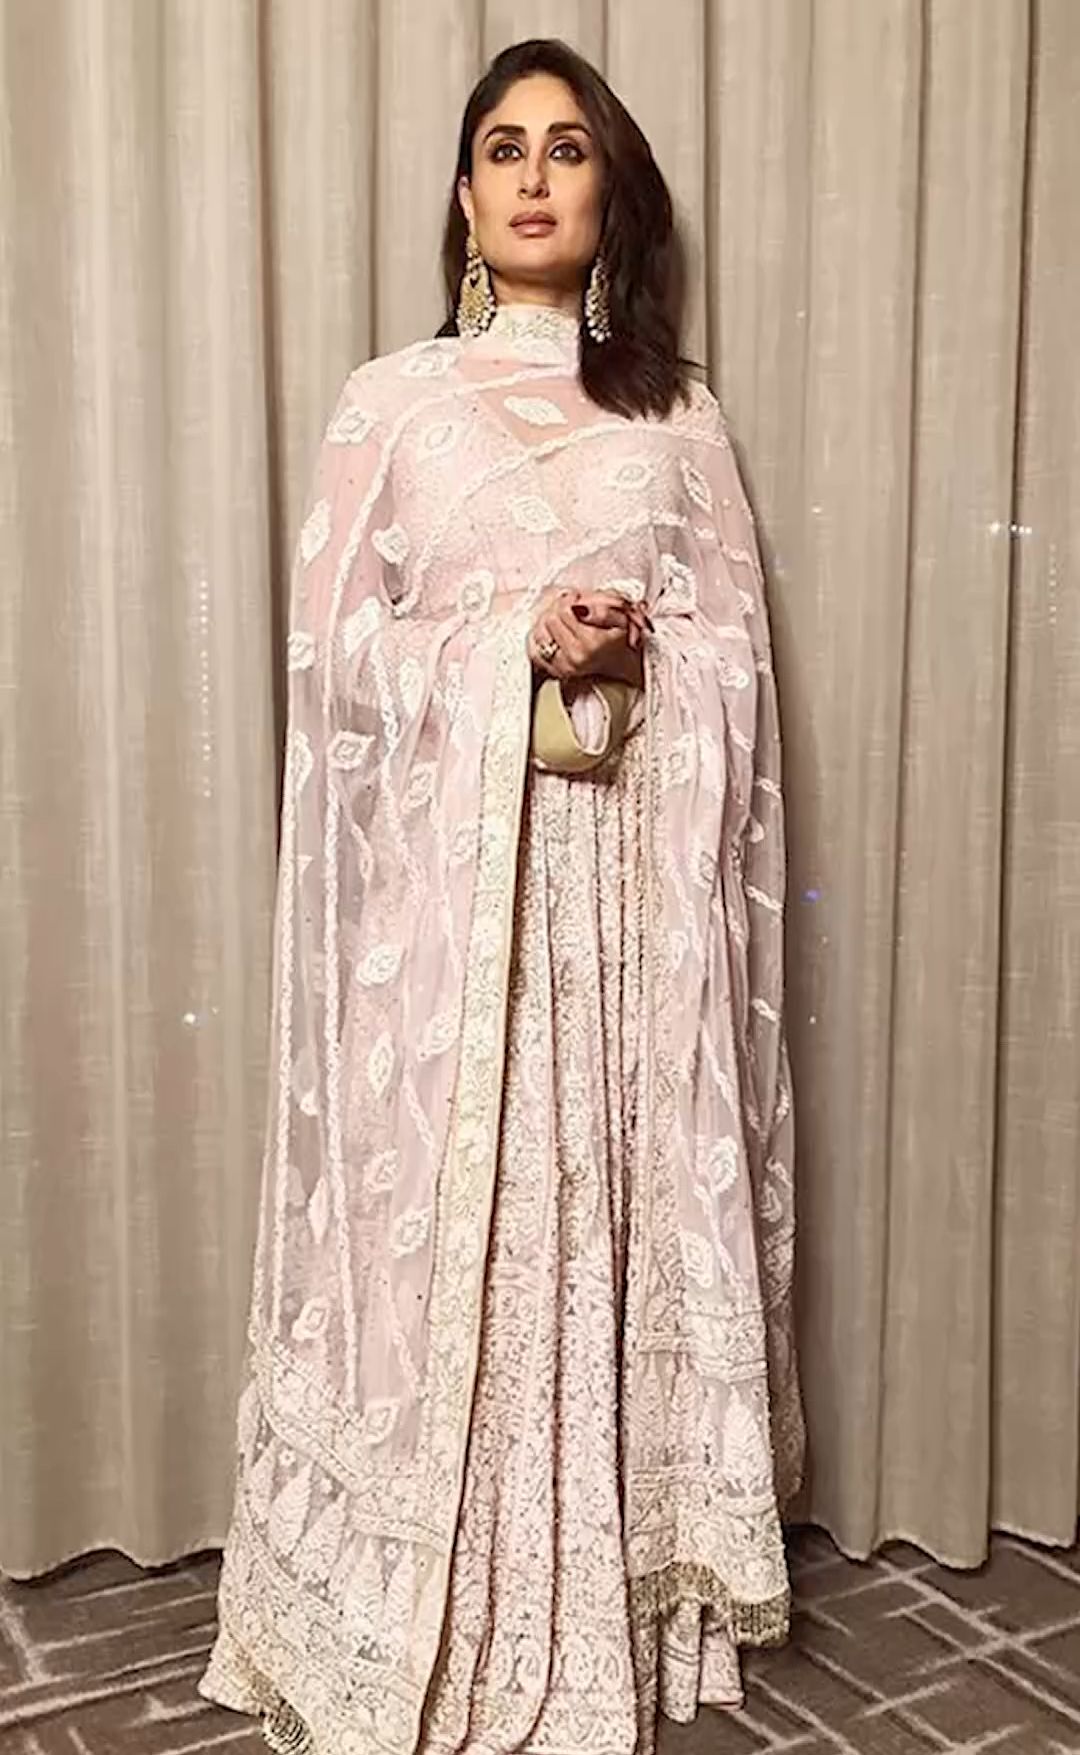 Kareena Kapoor Khan just showcased two wedding looks and we can't stop  gushing over them - Times of India